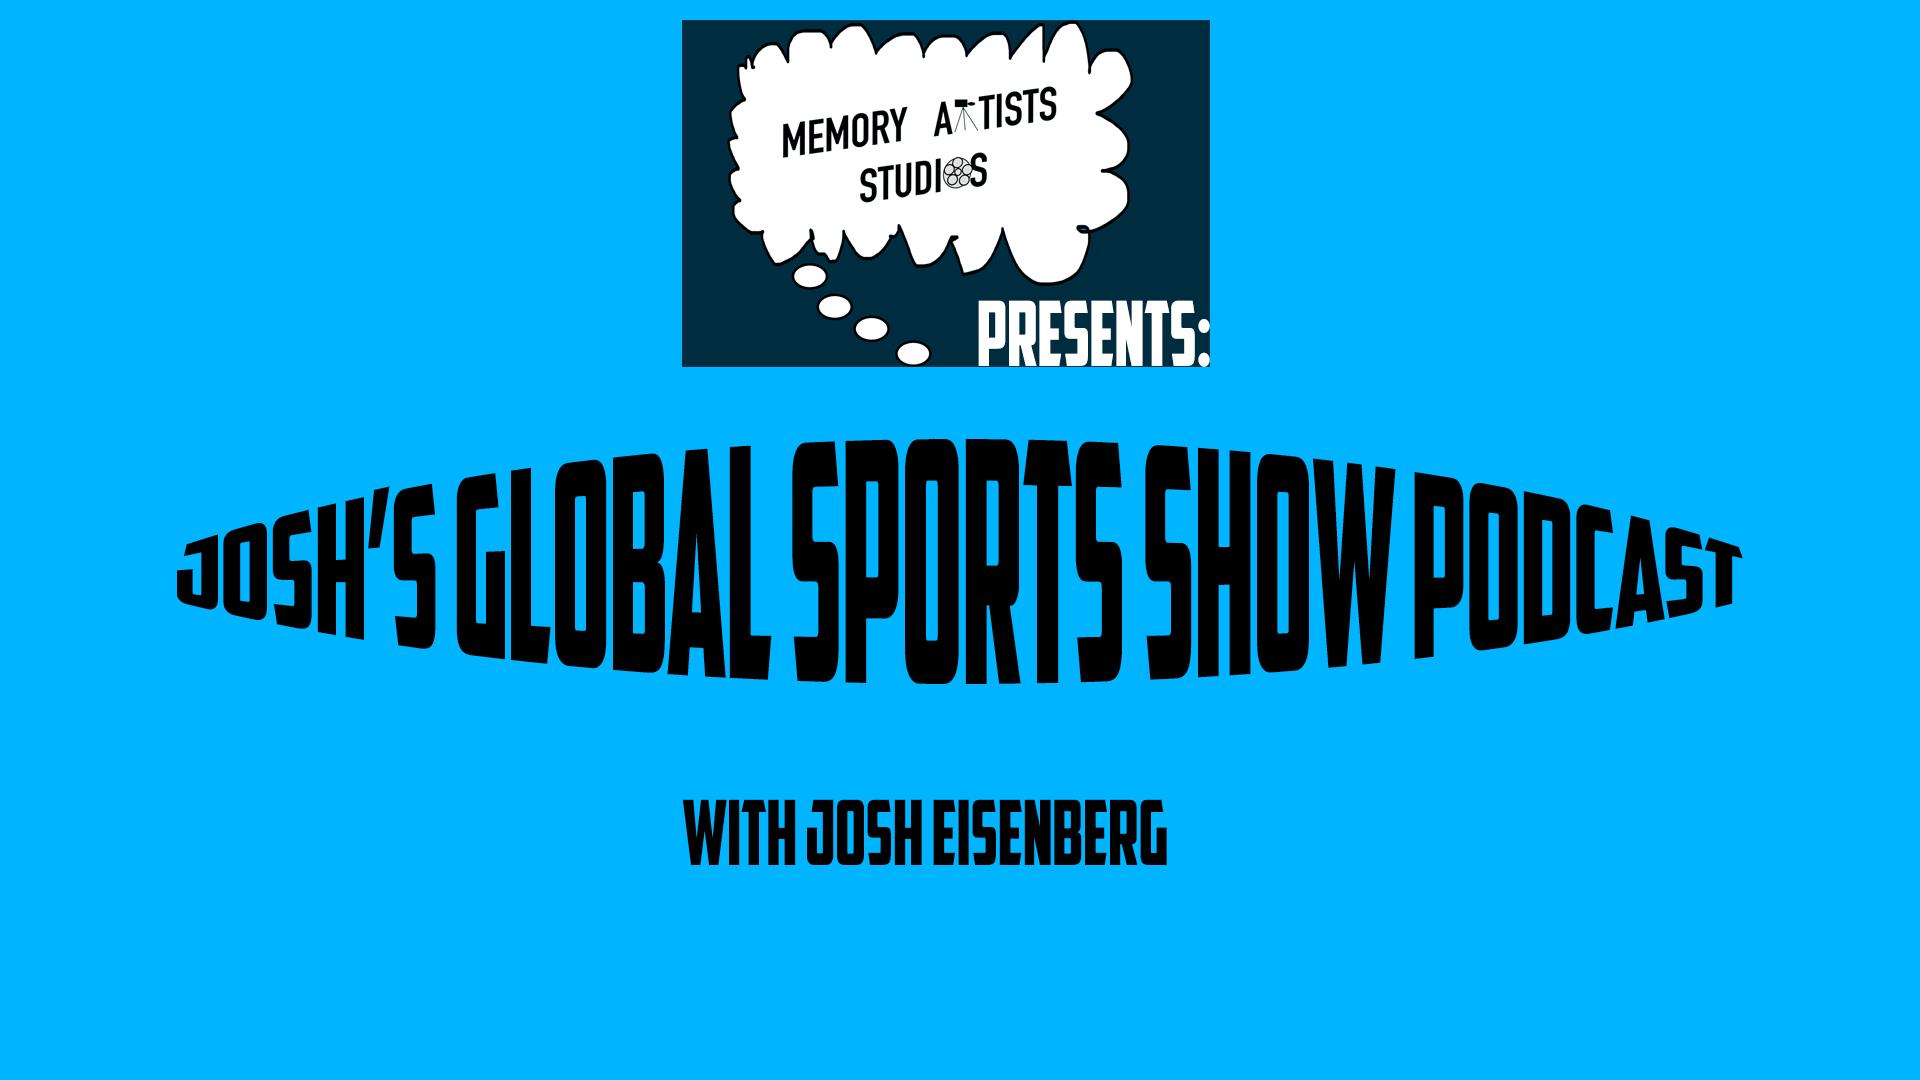 Josh's Global Sports Show Podcast- Episode 2: "All-In: Texas Hold 'Em"